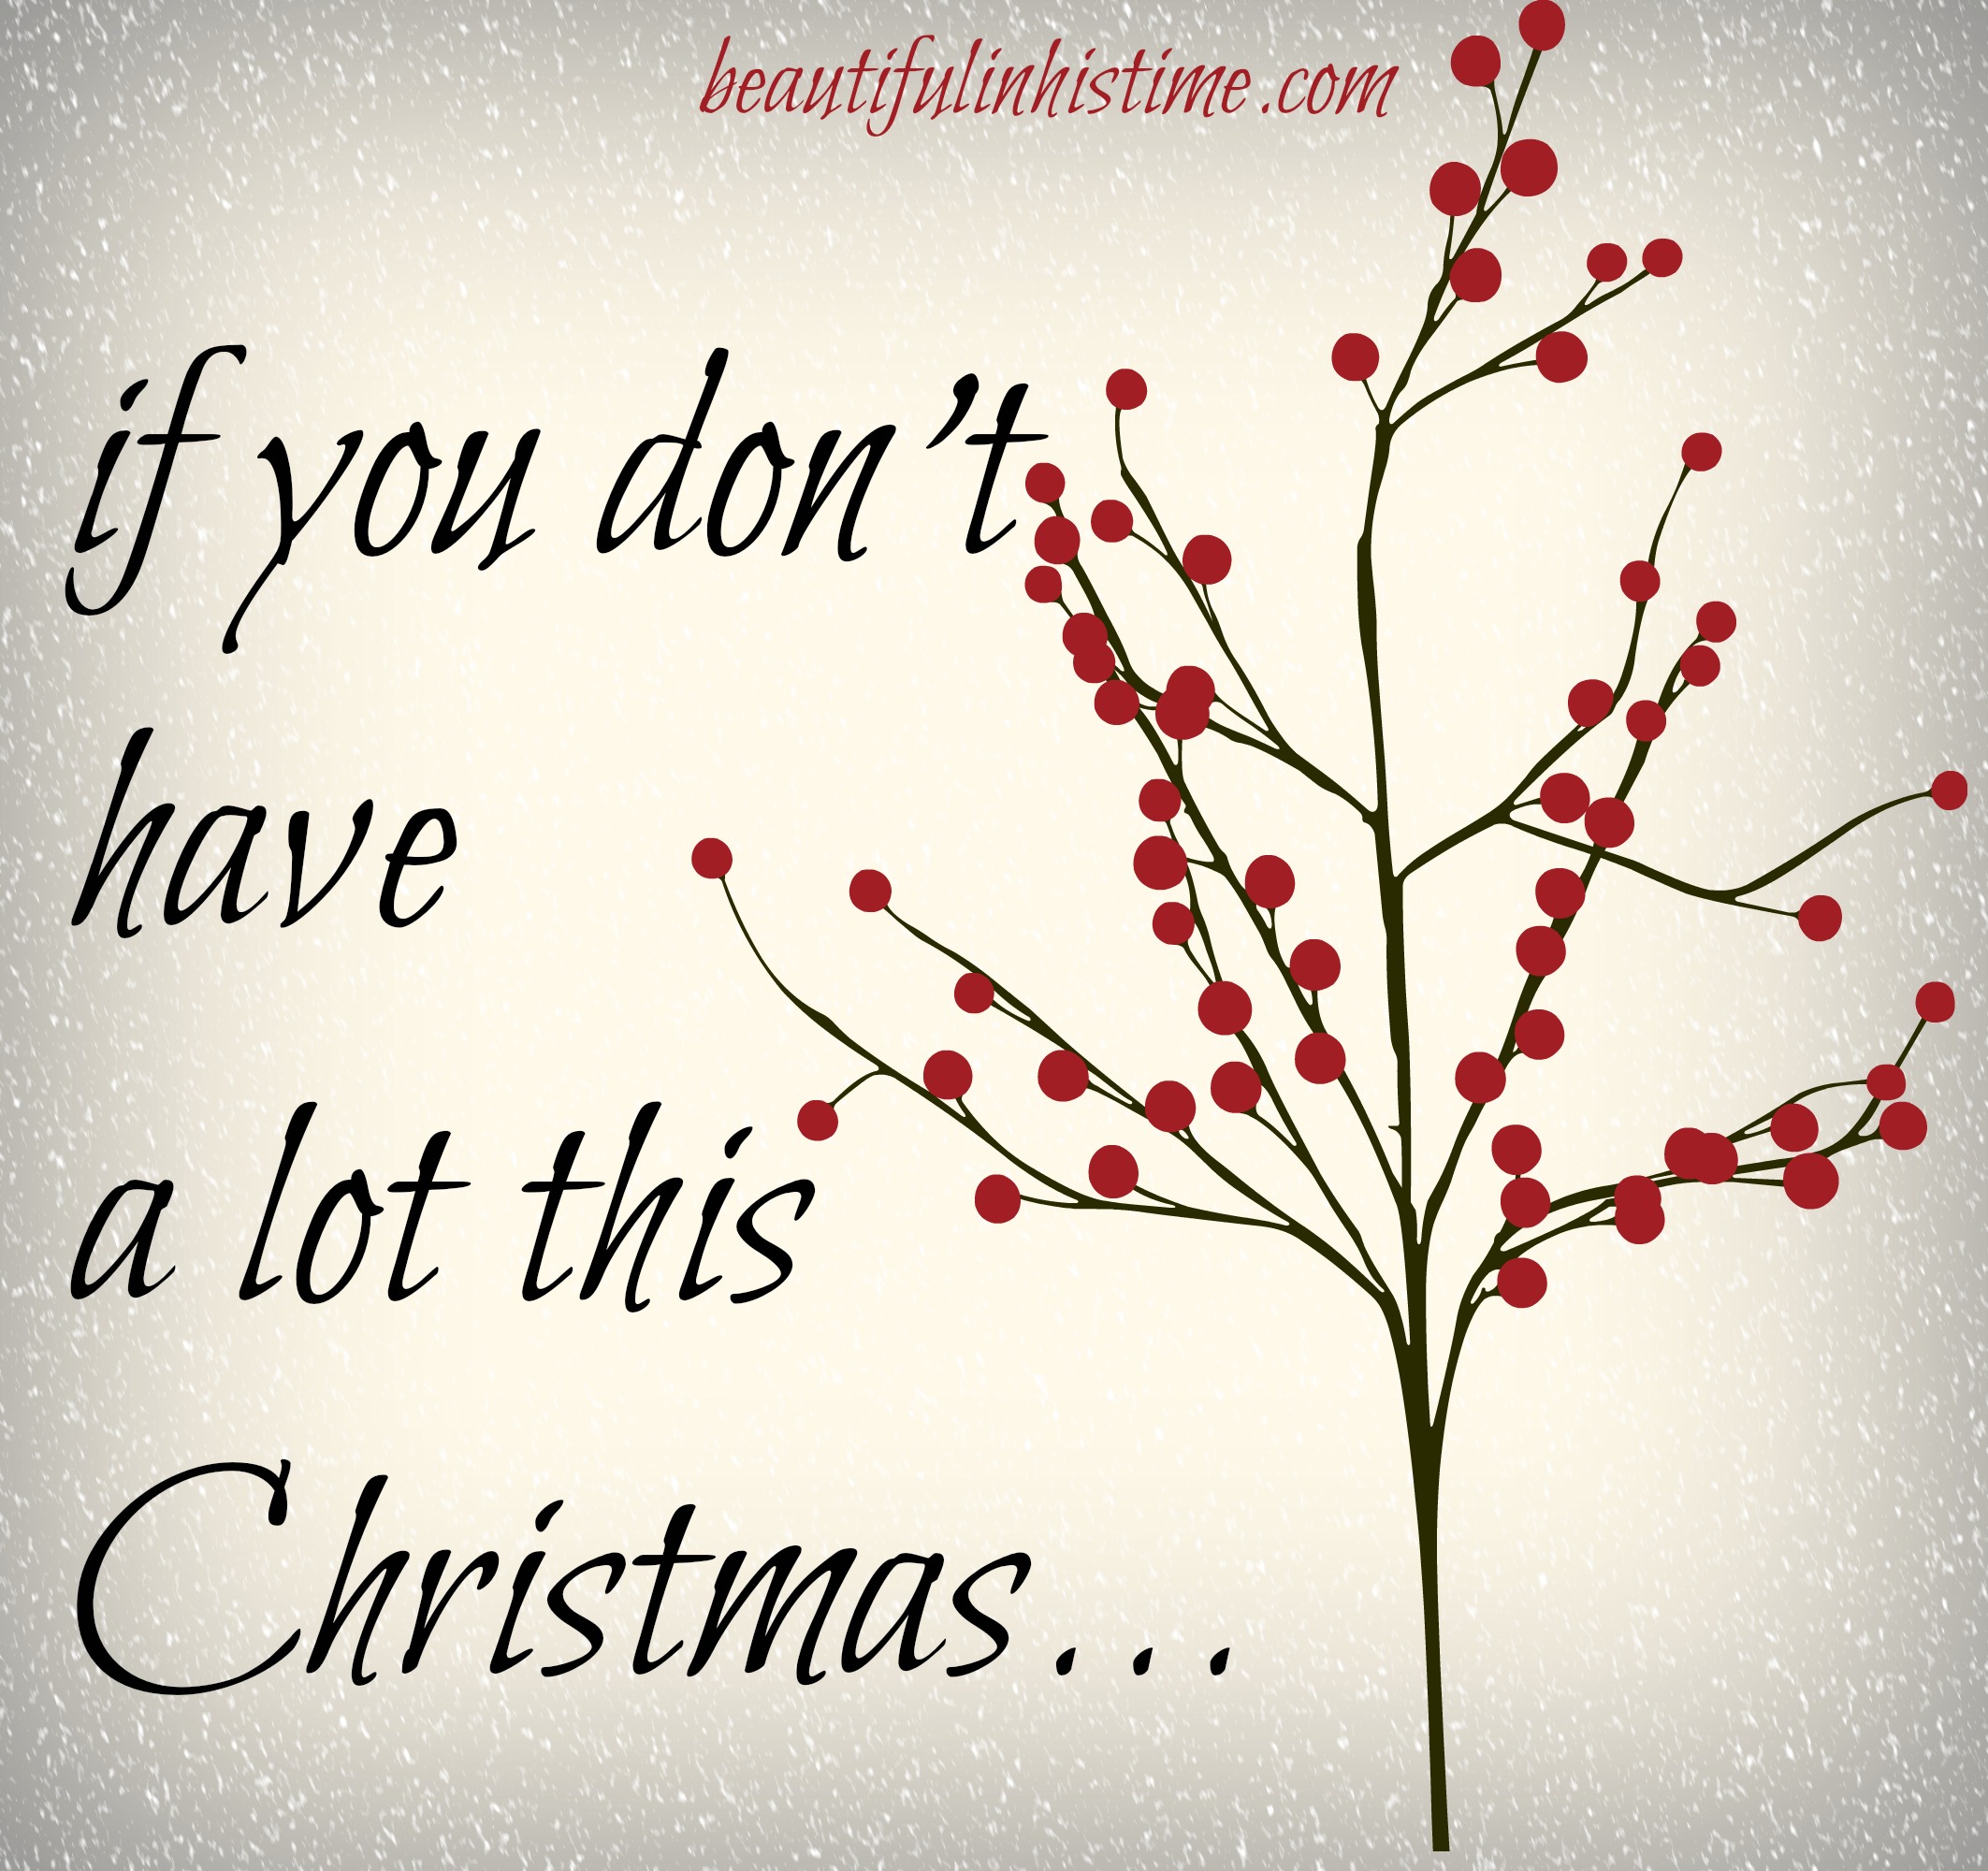 If you don't have a lot this Christmas...